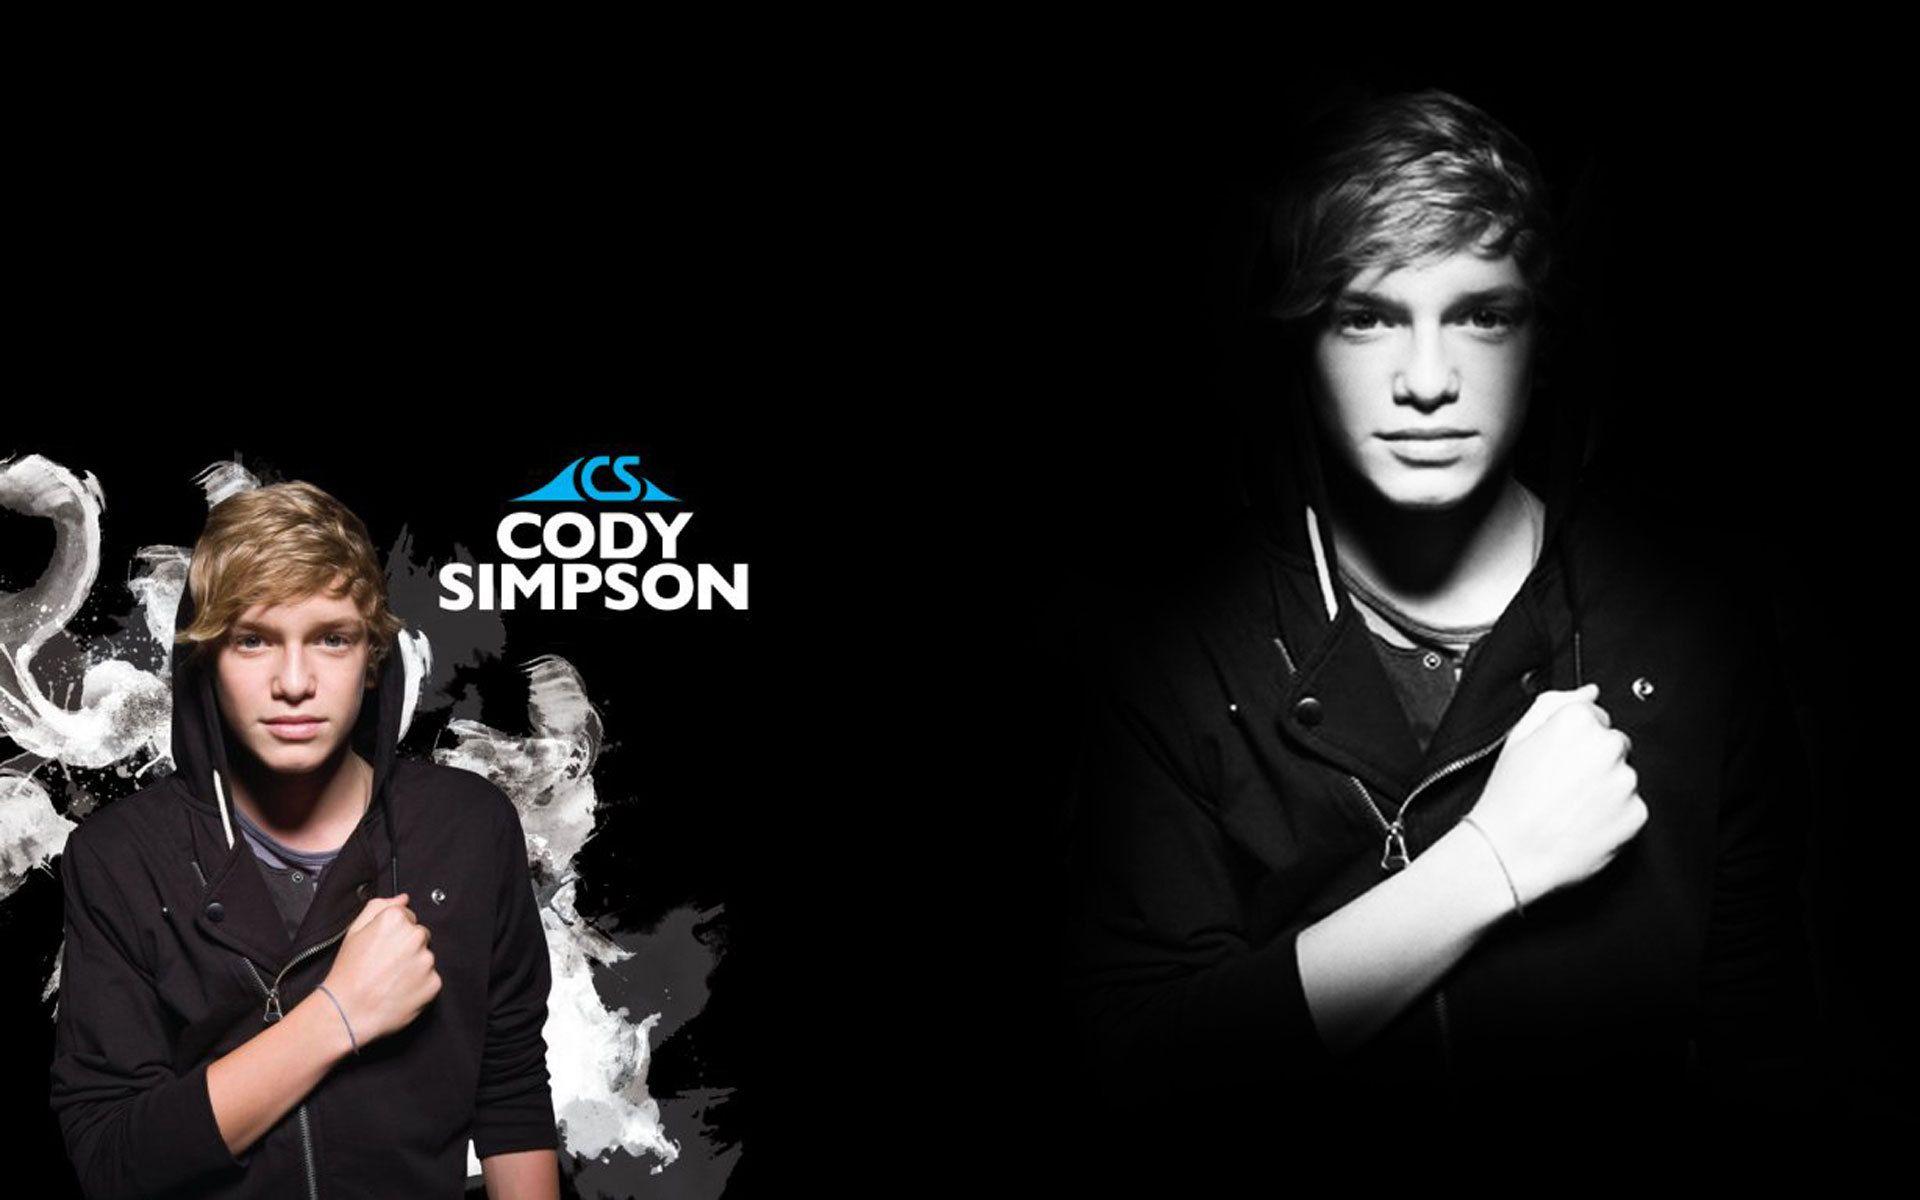 Cody Simpson Wallpaper Image Photo Picture Background